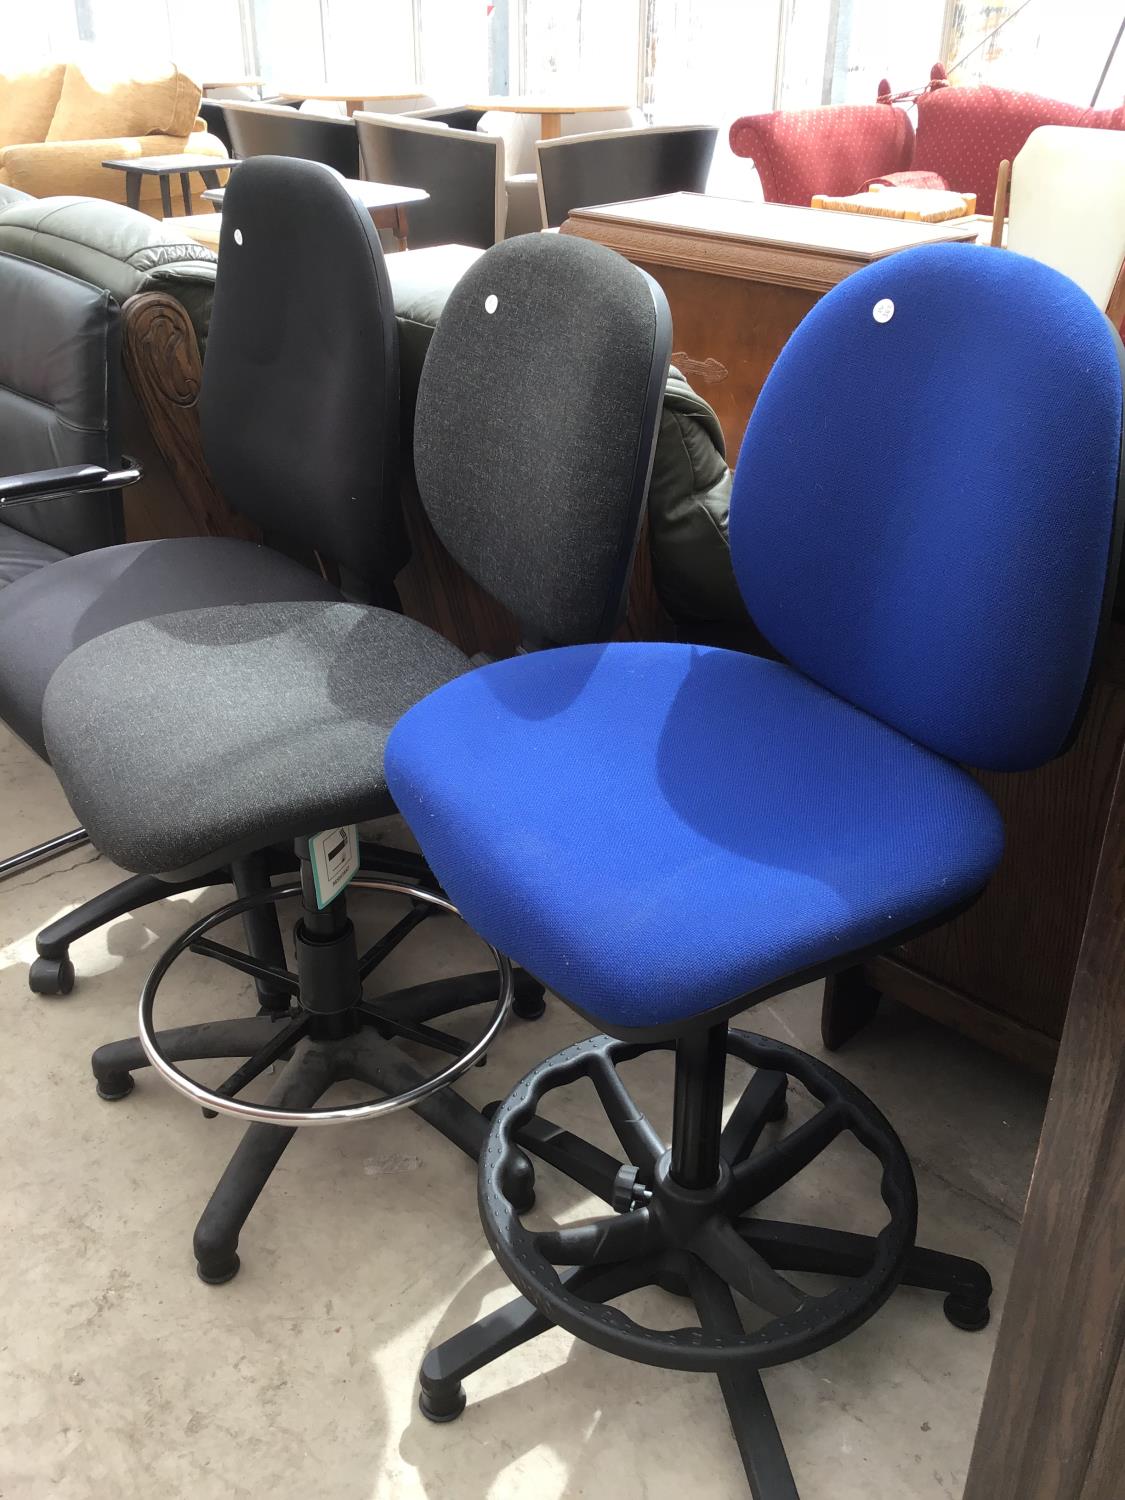 SIX MODERN OFFICE CHAIRS - Image 4 of 4